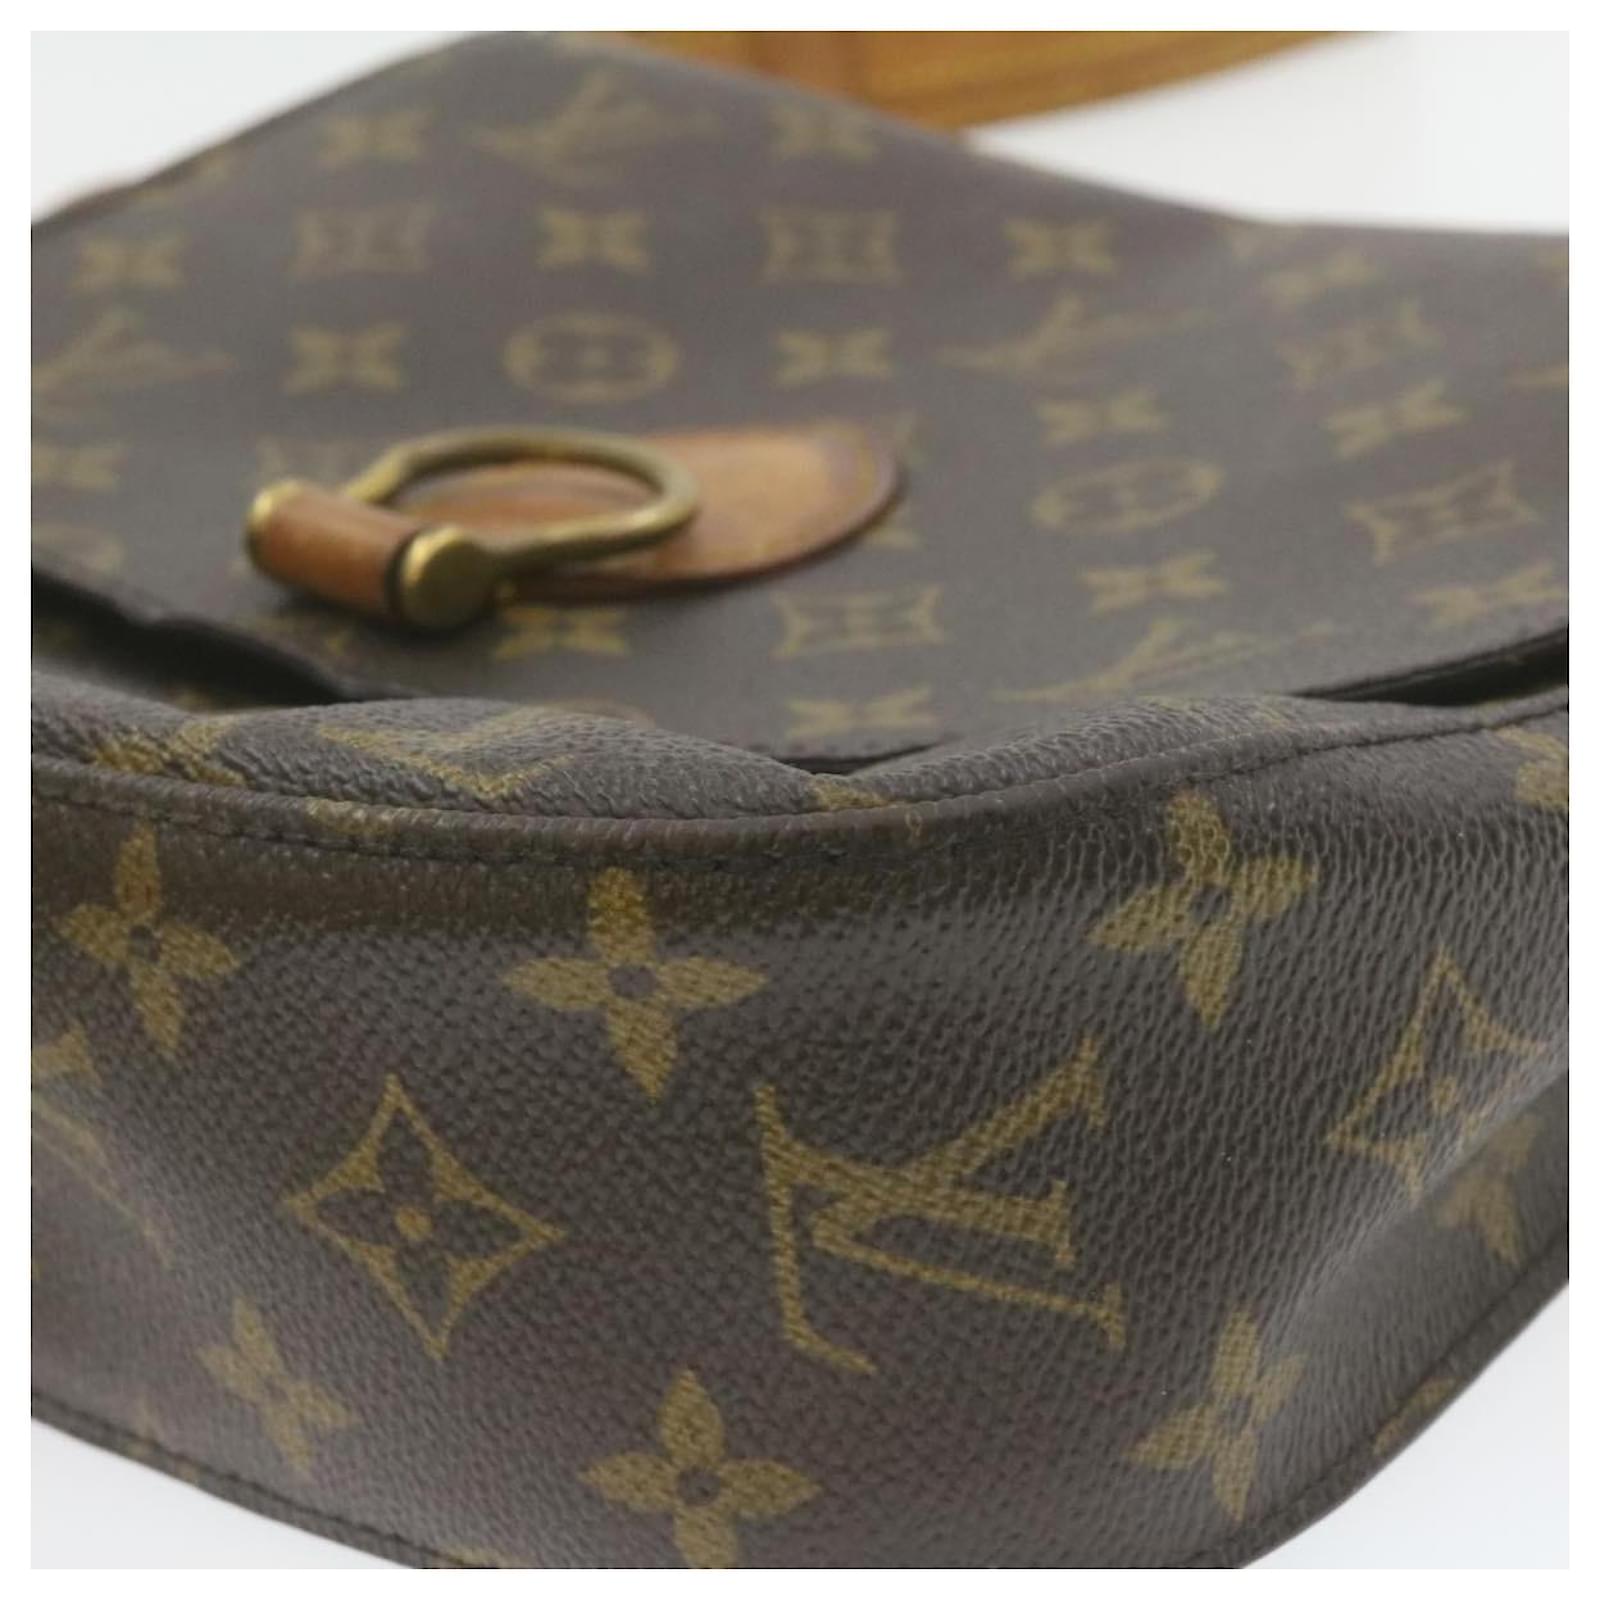 I need help finding the Louis Vuitton Saint Cloud in a size GM : r/DHgate